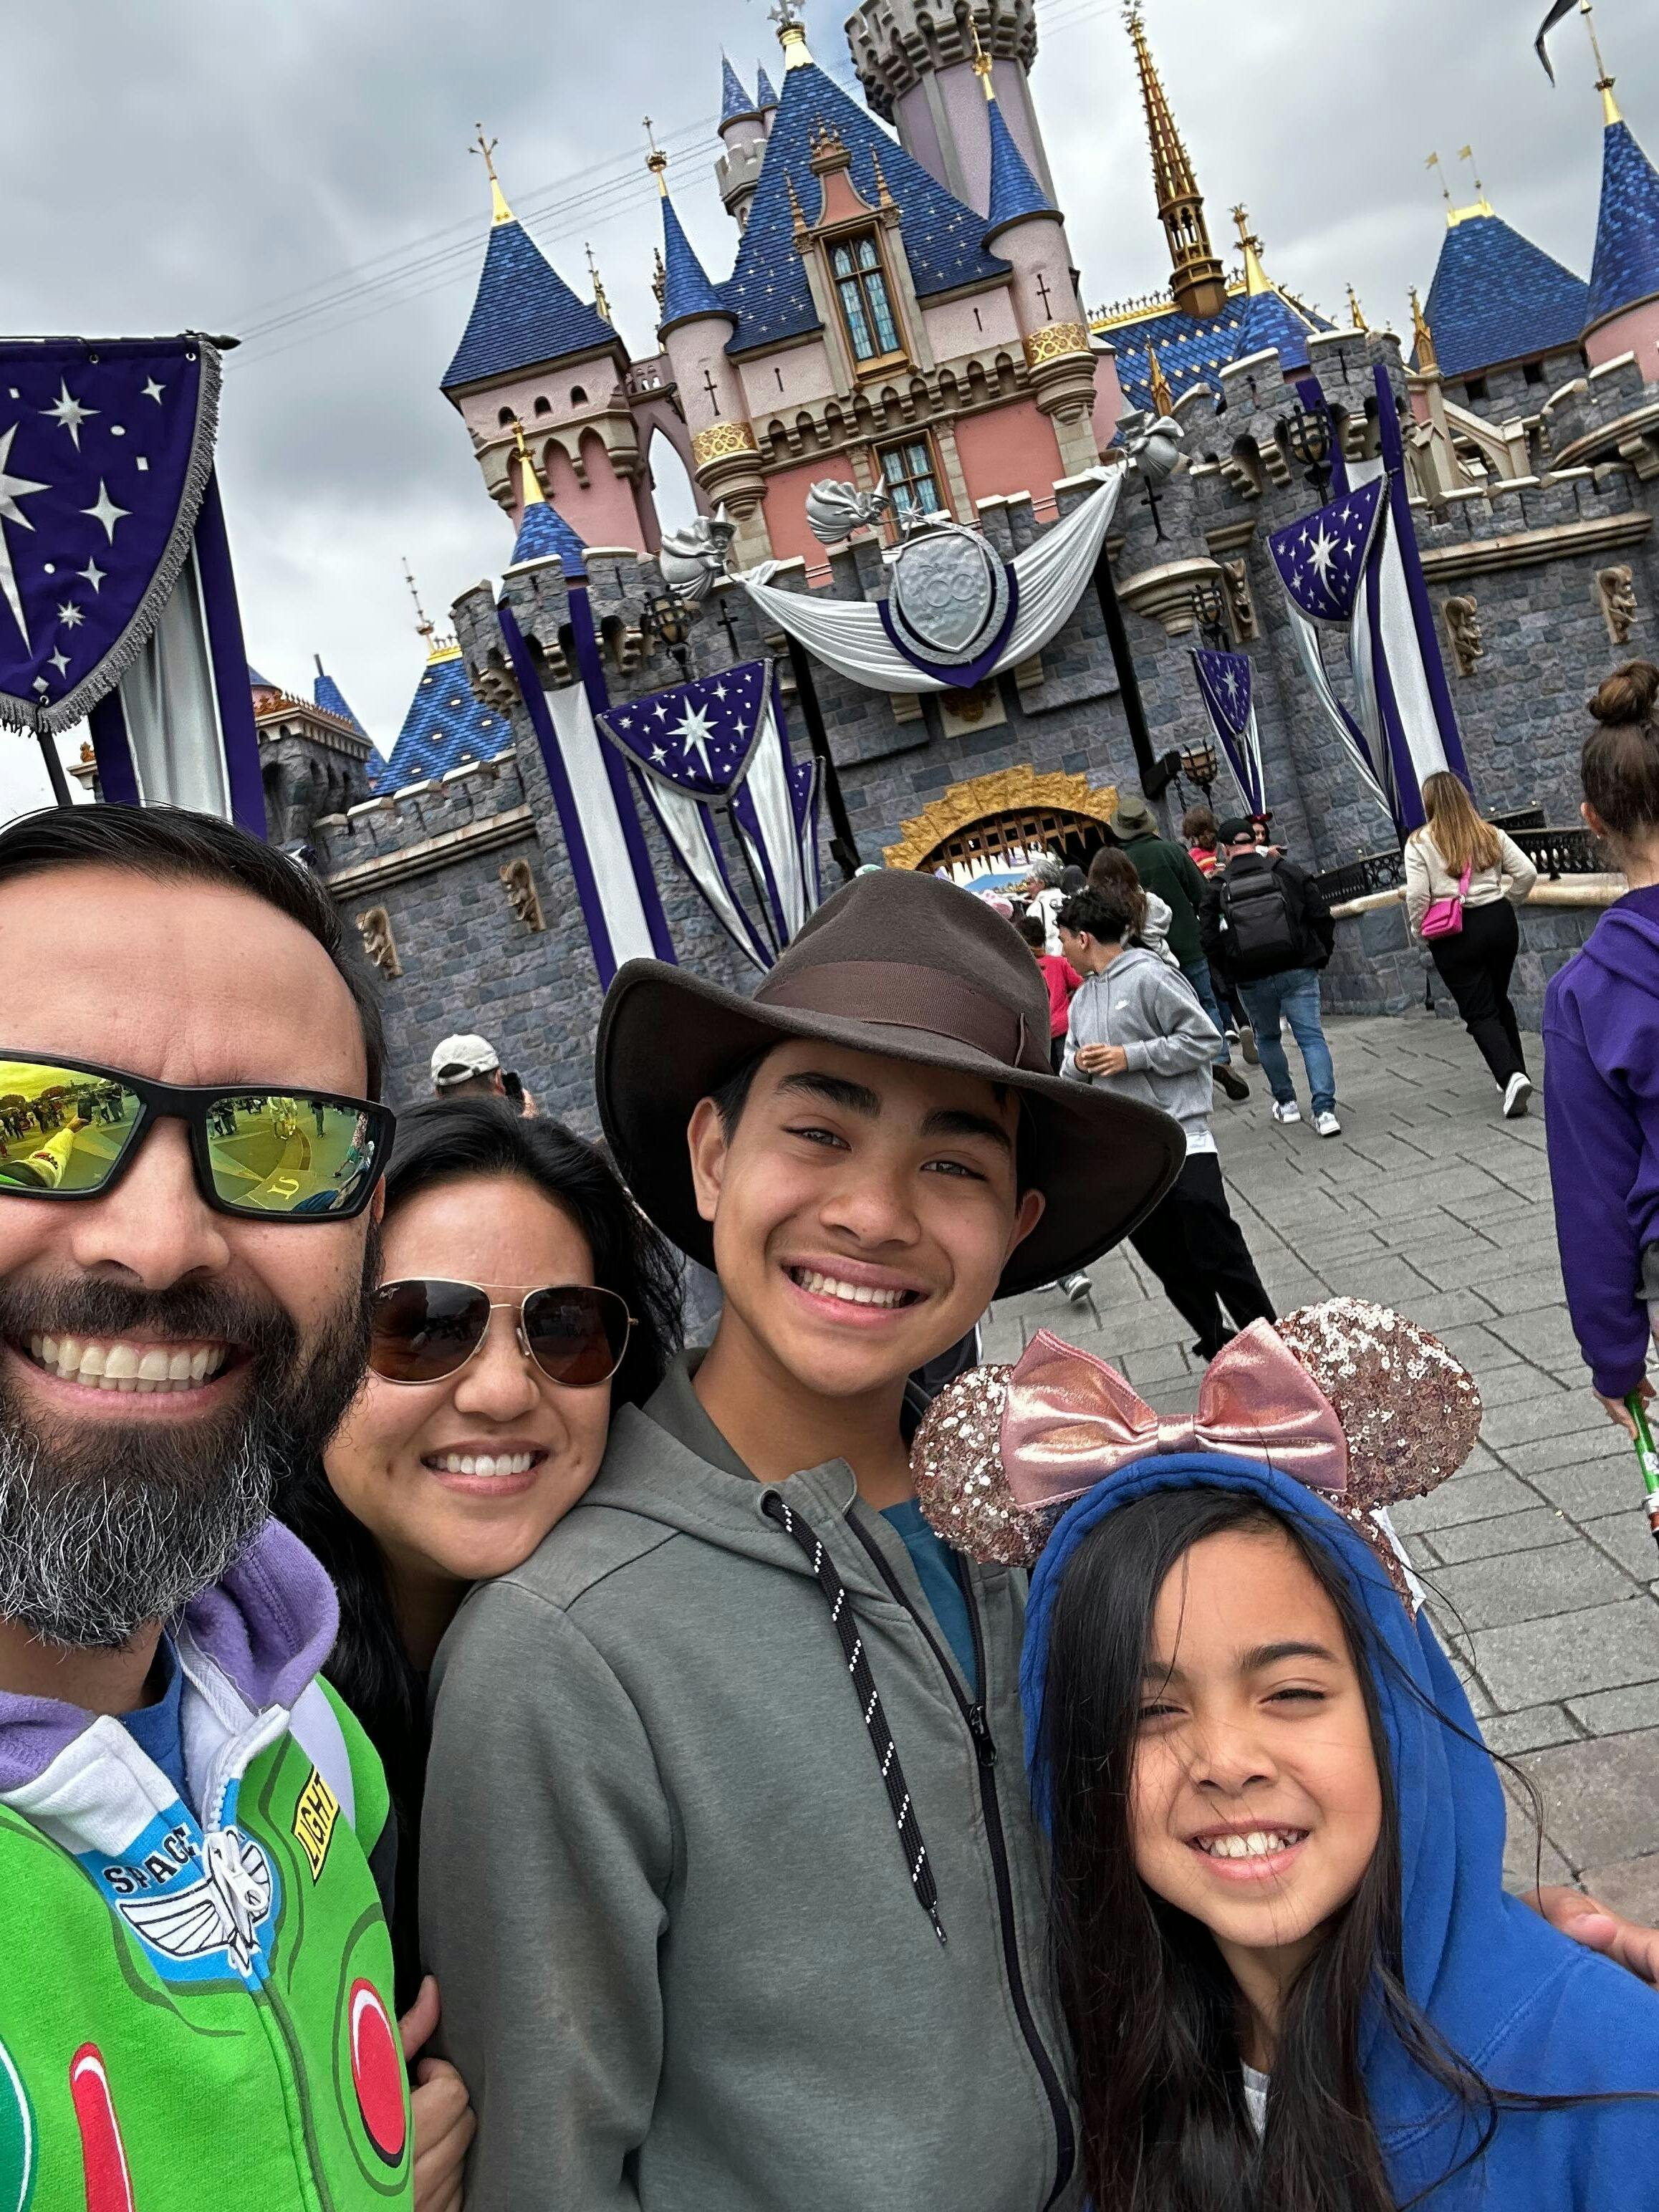 Flynn family selfie taken at Disneyland with castle in the background.